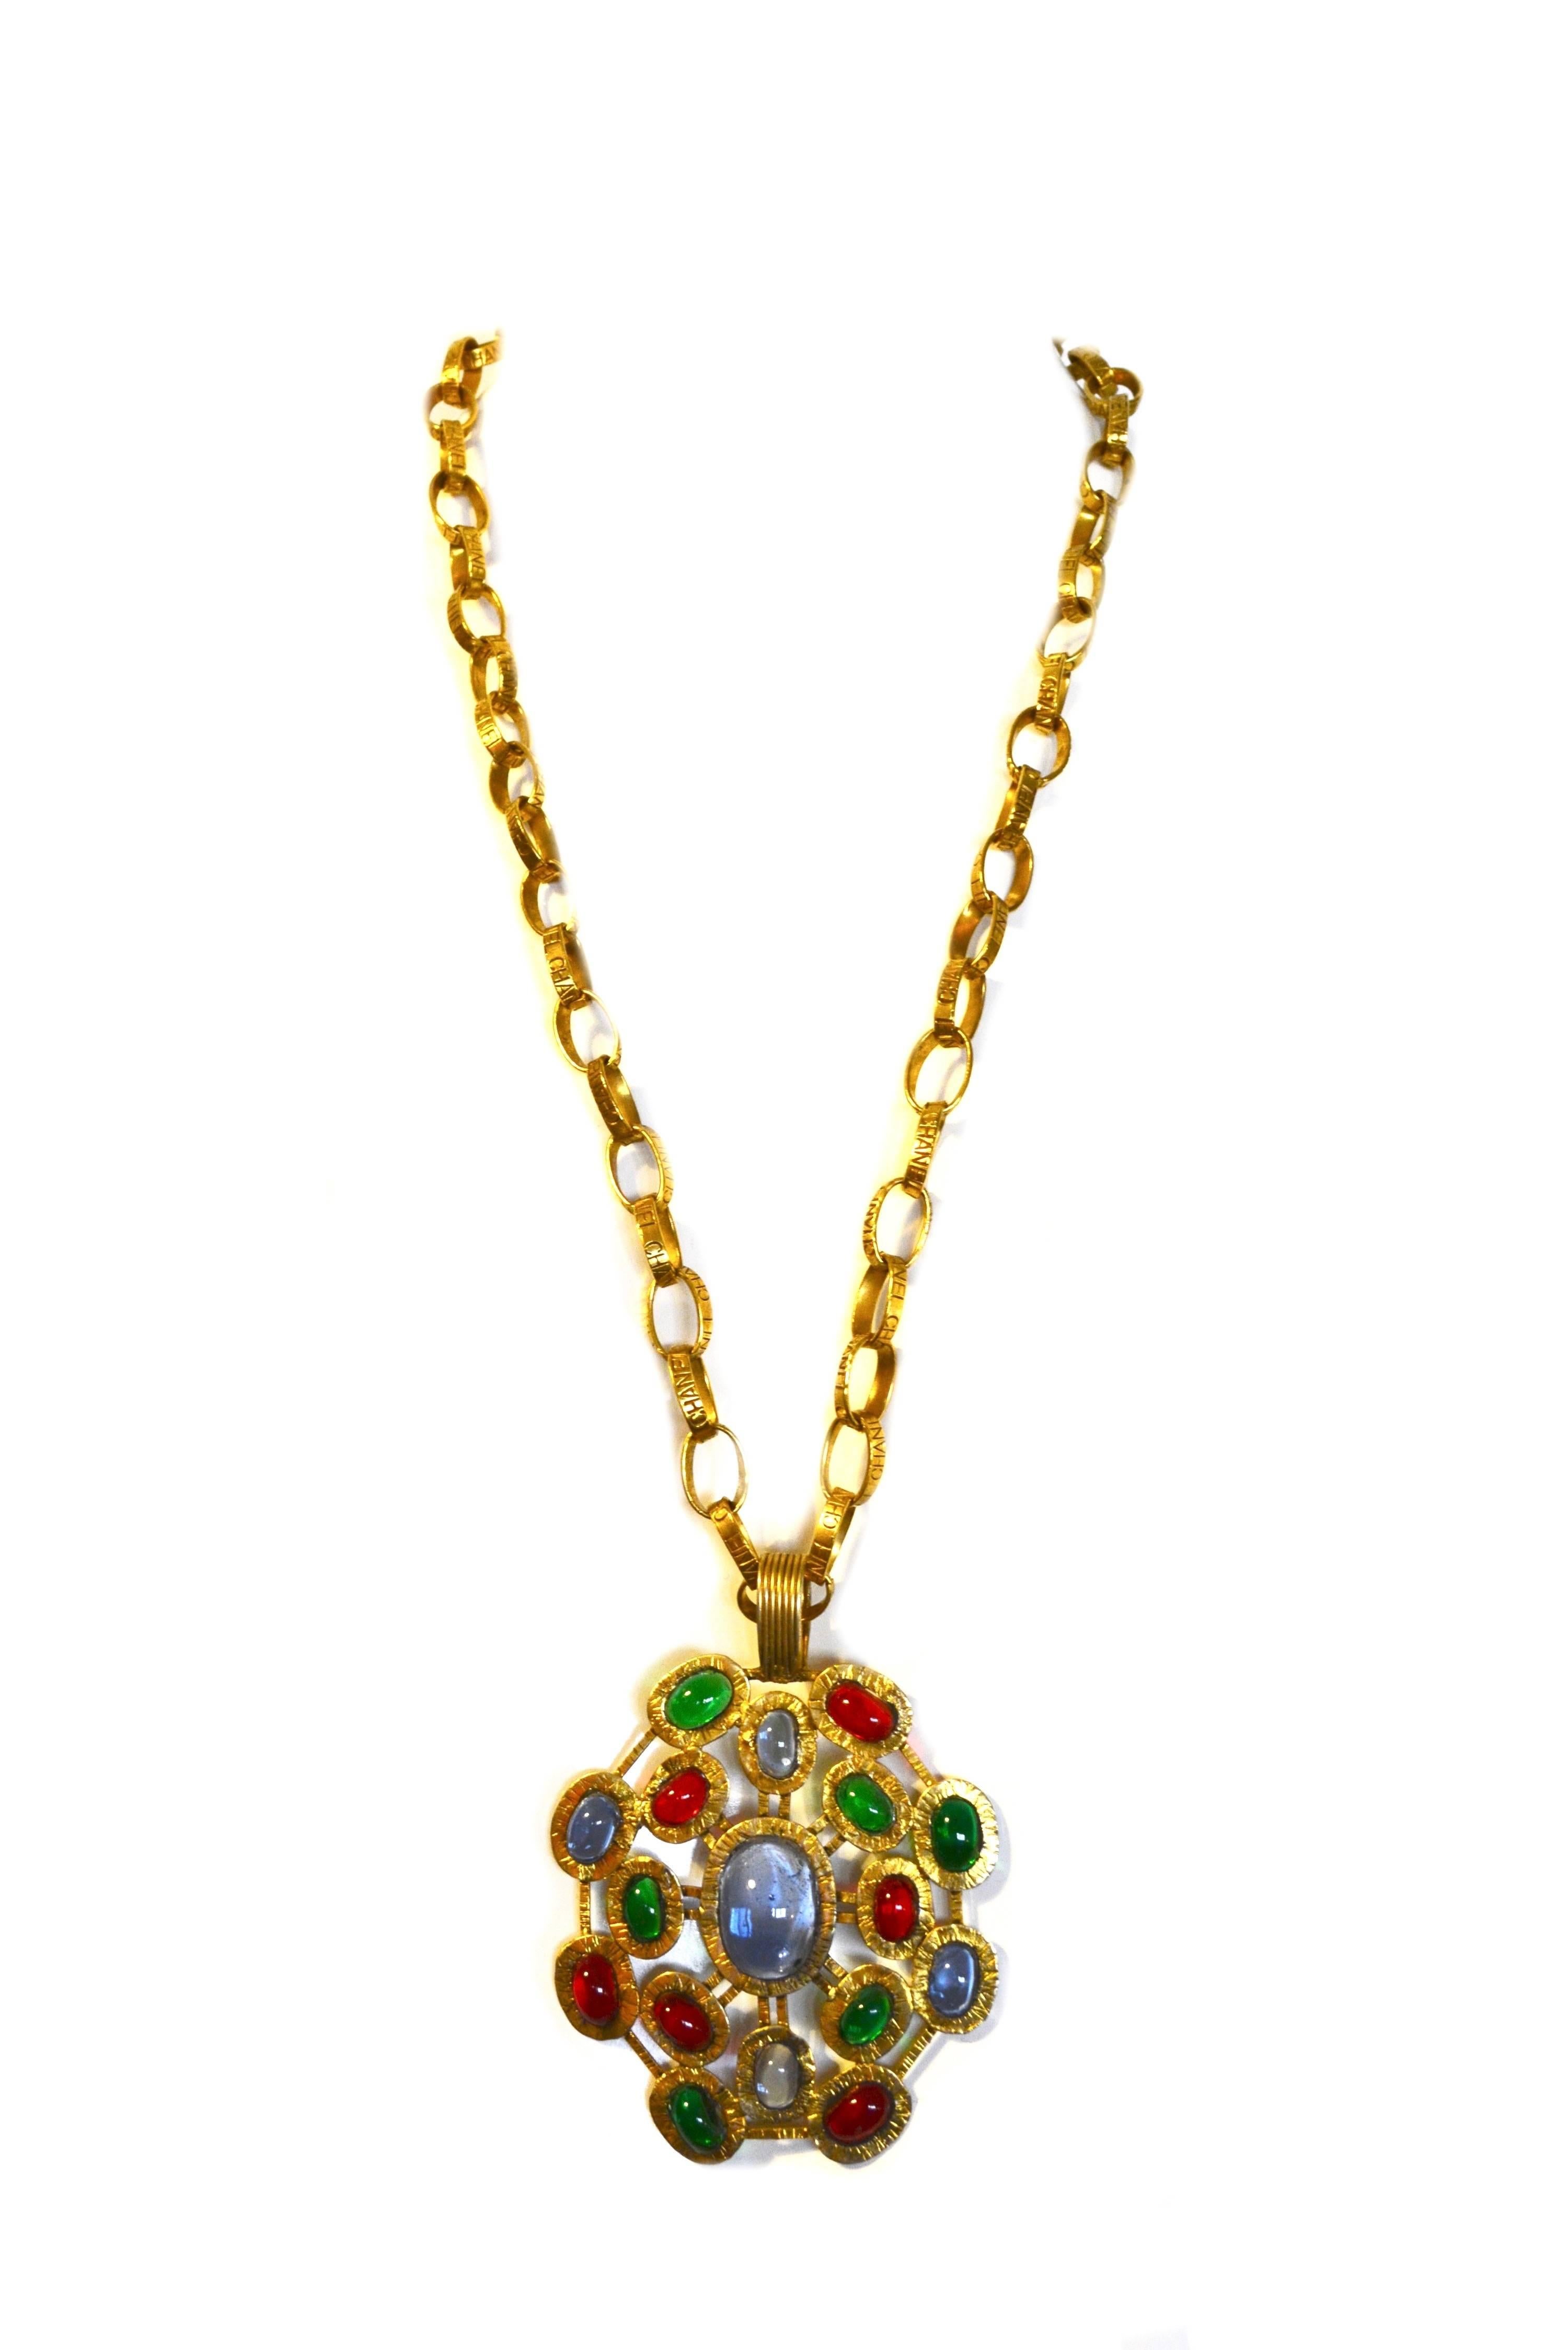 Unique Chanel stamped chain link necklace with a large Chanel Gripoix pendant.  Necklace is signed on the chain and has a hangtag indicating a date of about 1988 for season 25.  The chain measures about 29